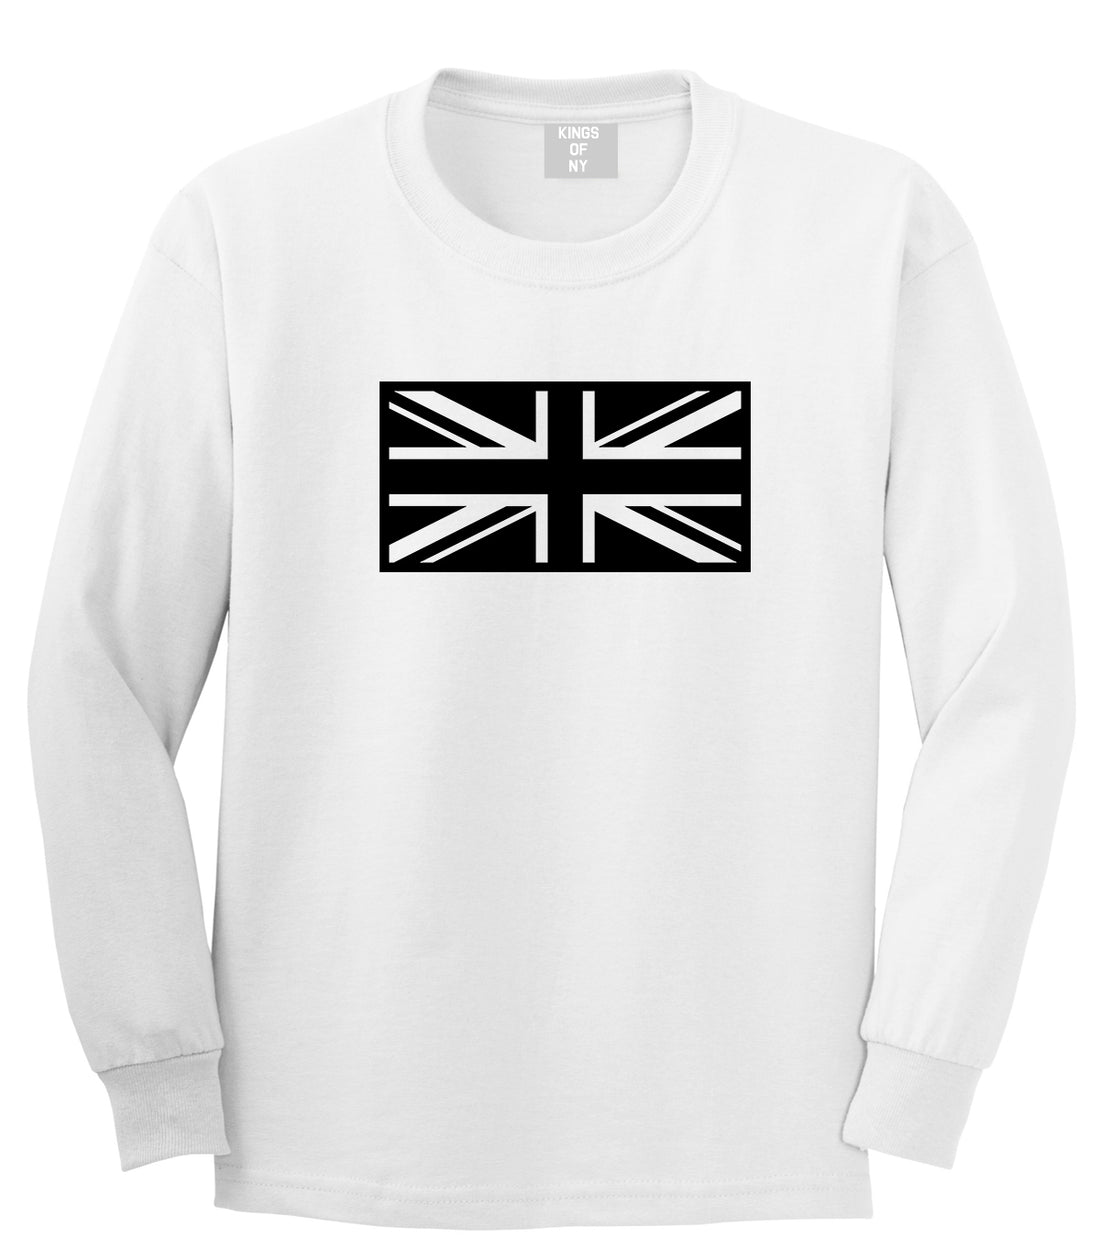 British Army Style White Long Sleeve T-Shirt by Kings Of NY